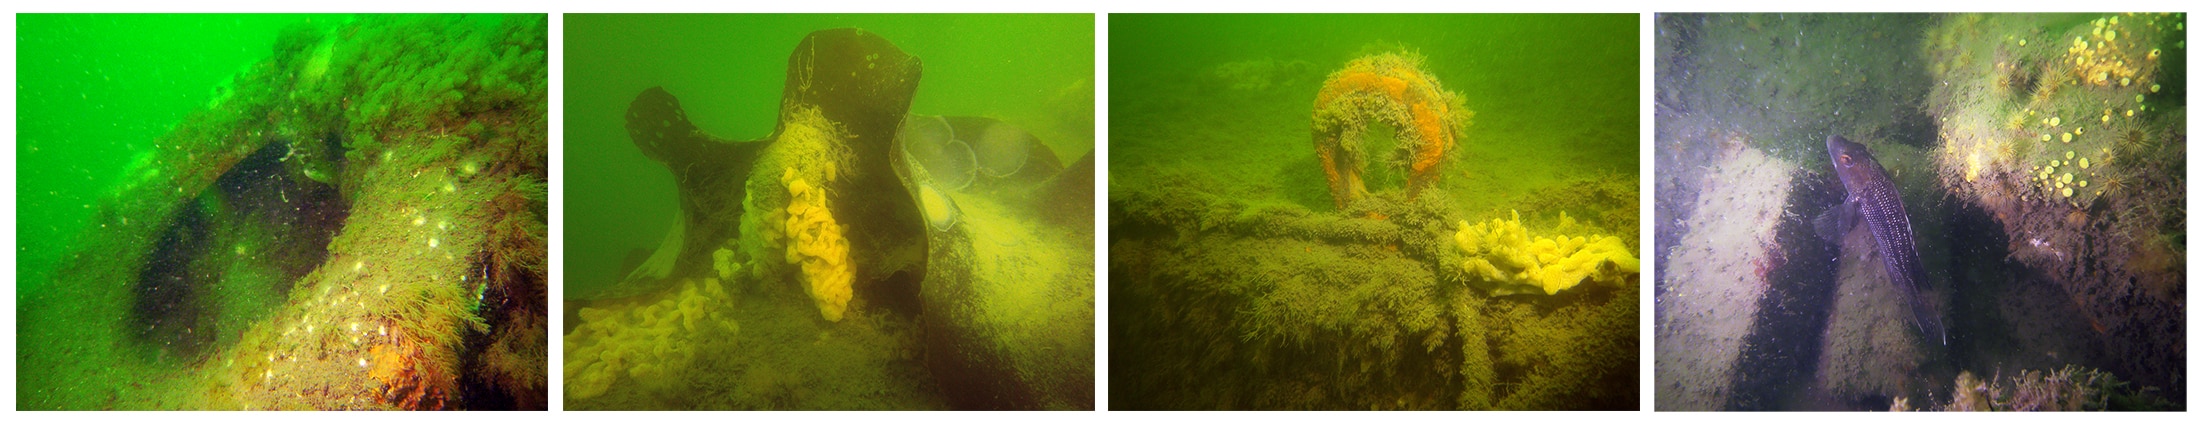 Examples of artificial reefs created in Dartmouth, Sculpin Ledge, and Yarmouth